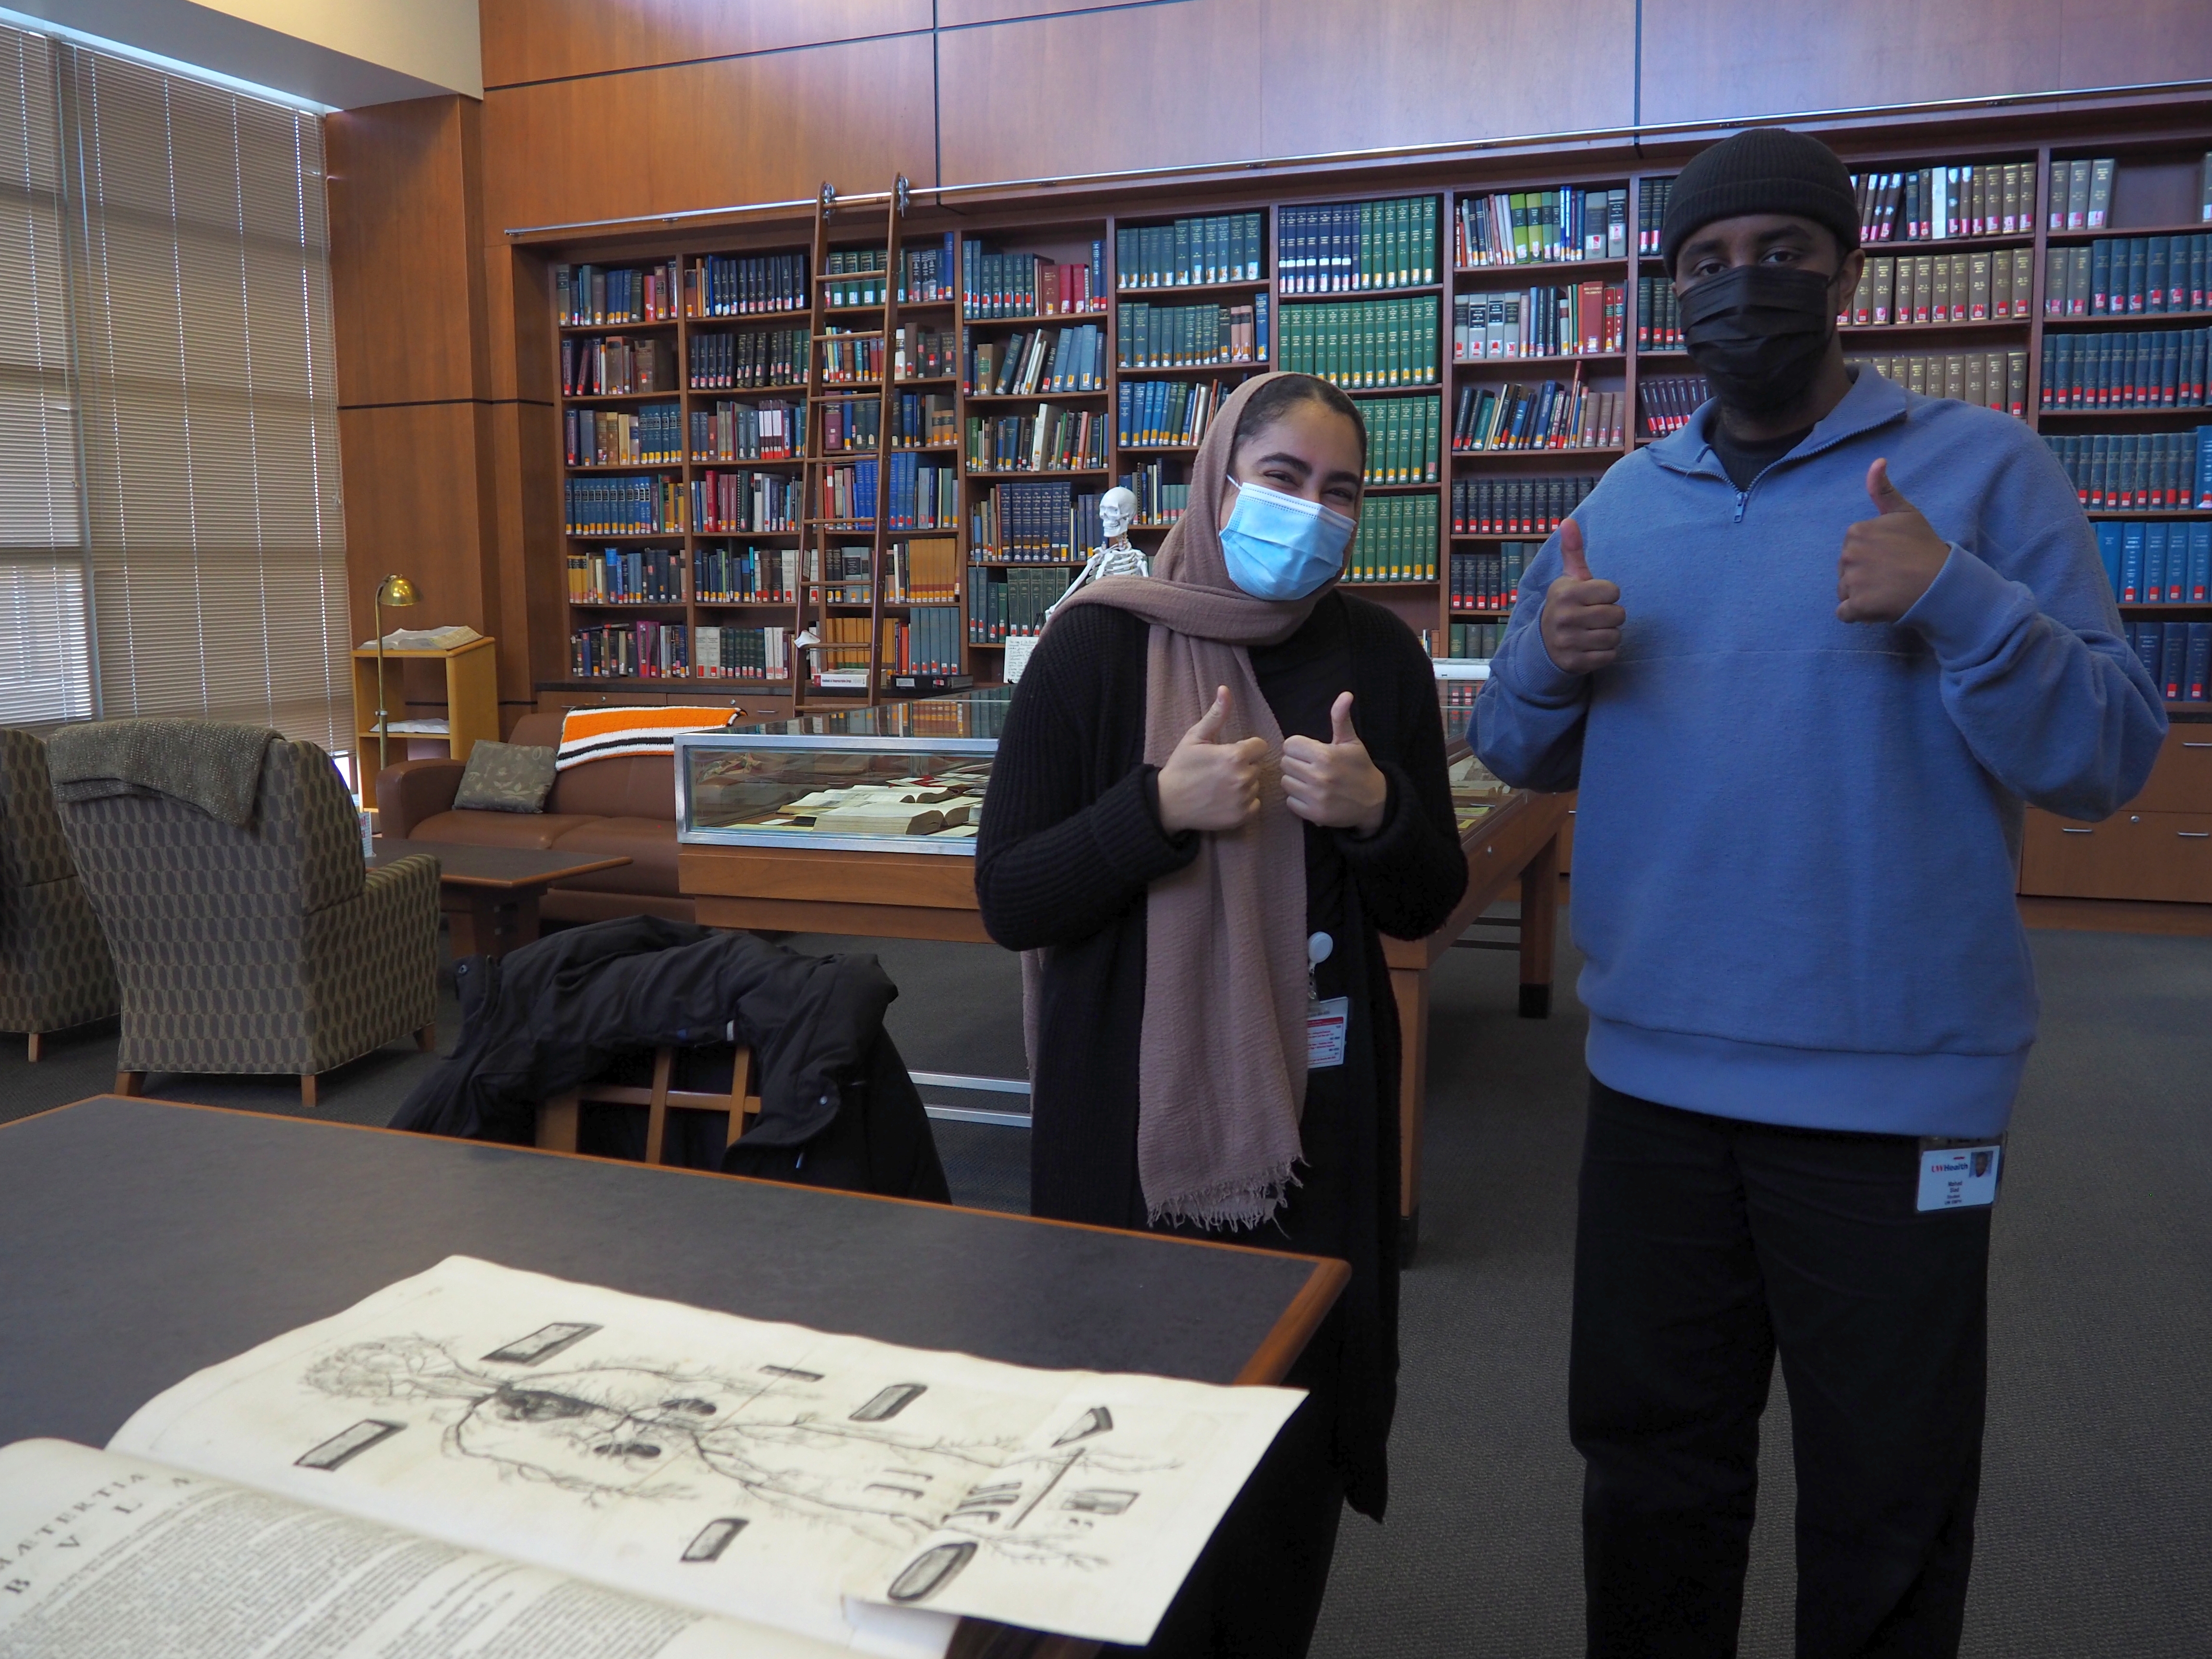 two masked medical students pose in the Ebling Library with book shelves behind and open book in front of them